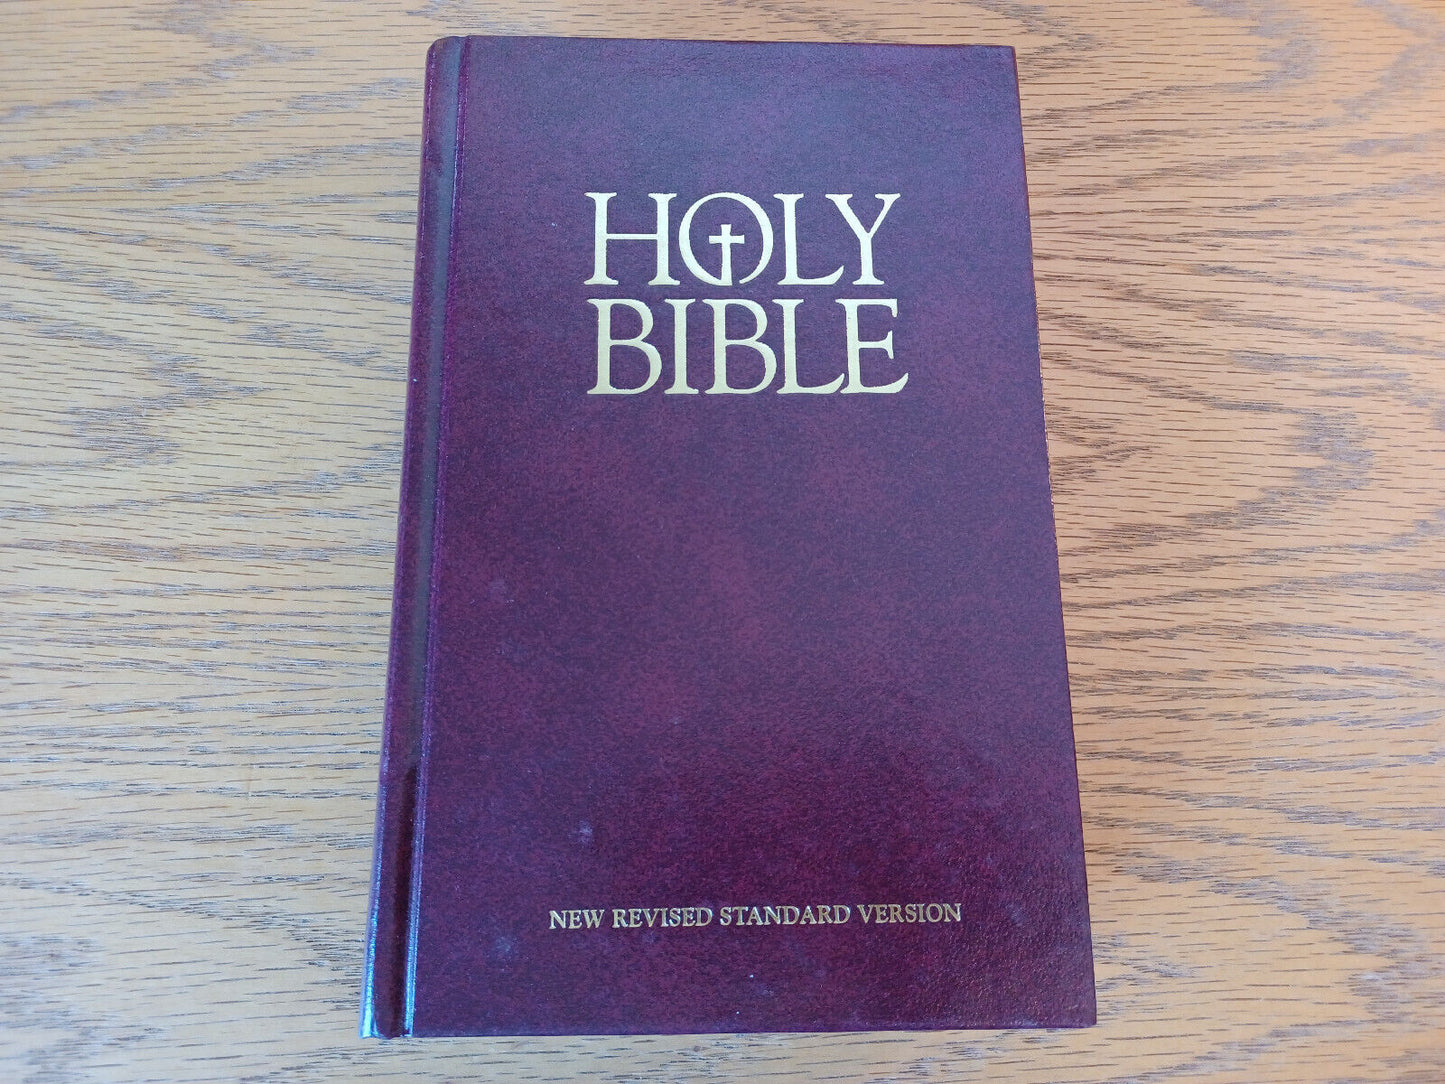 Holy Bible New Revised Standard Version American Bible Society Hardcover R